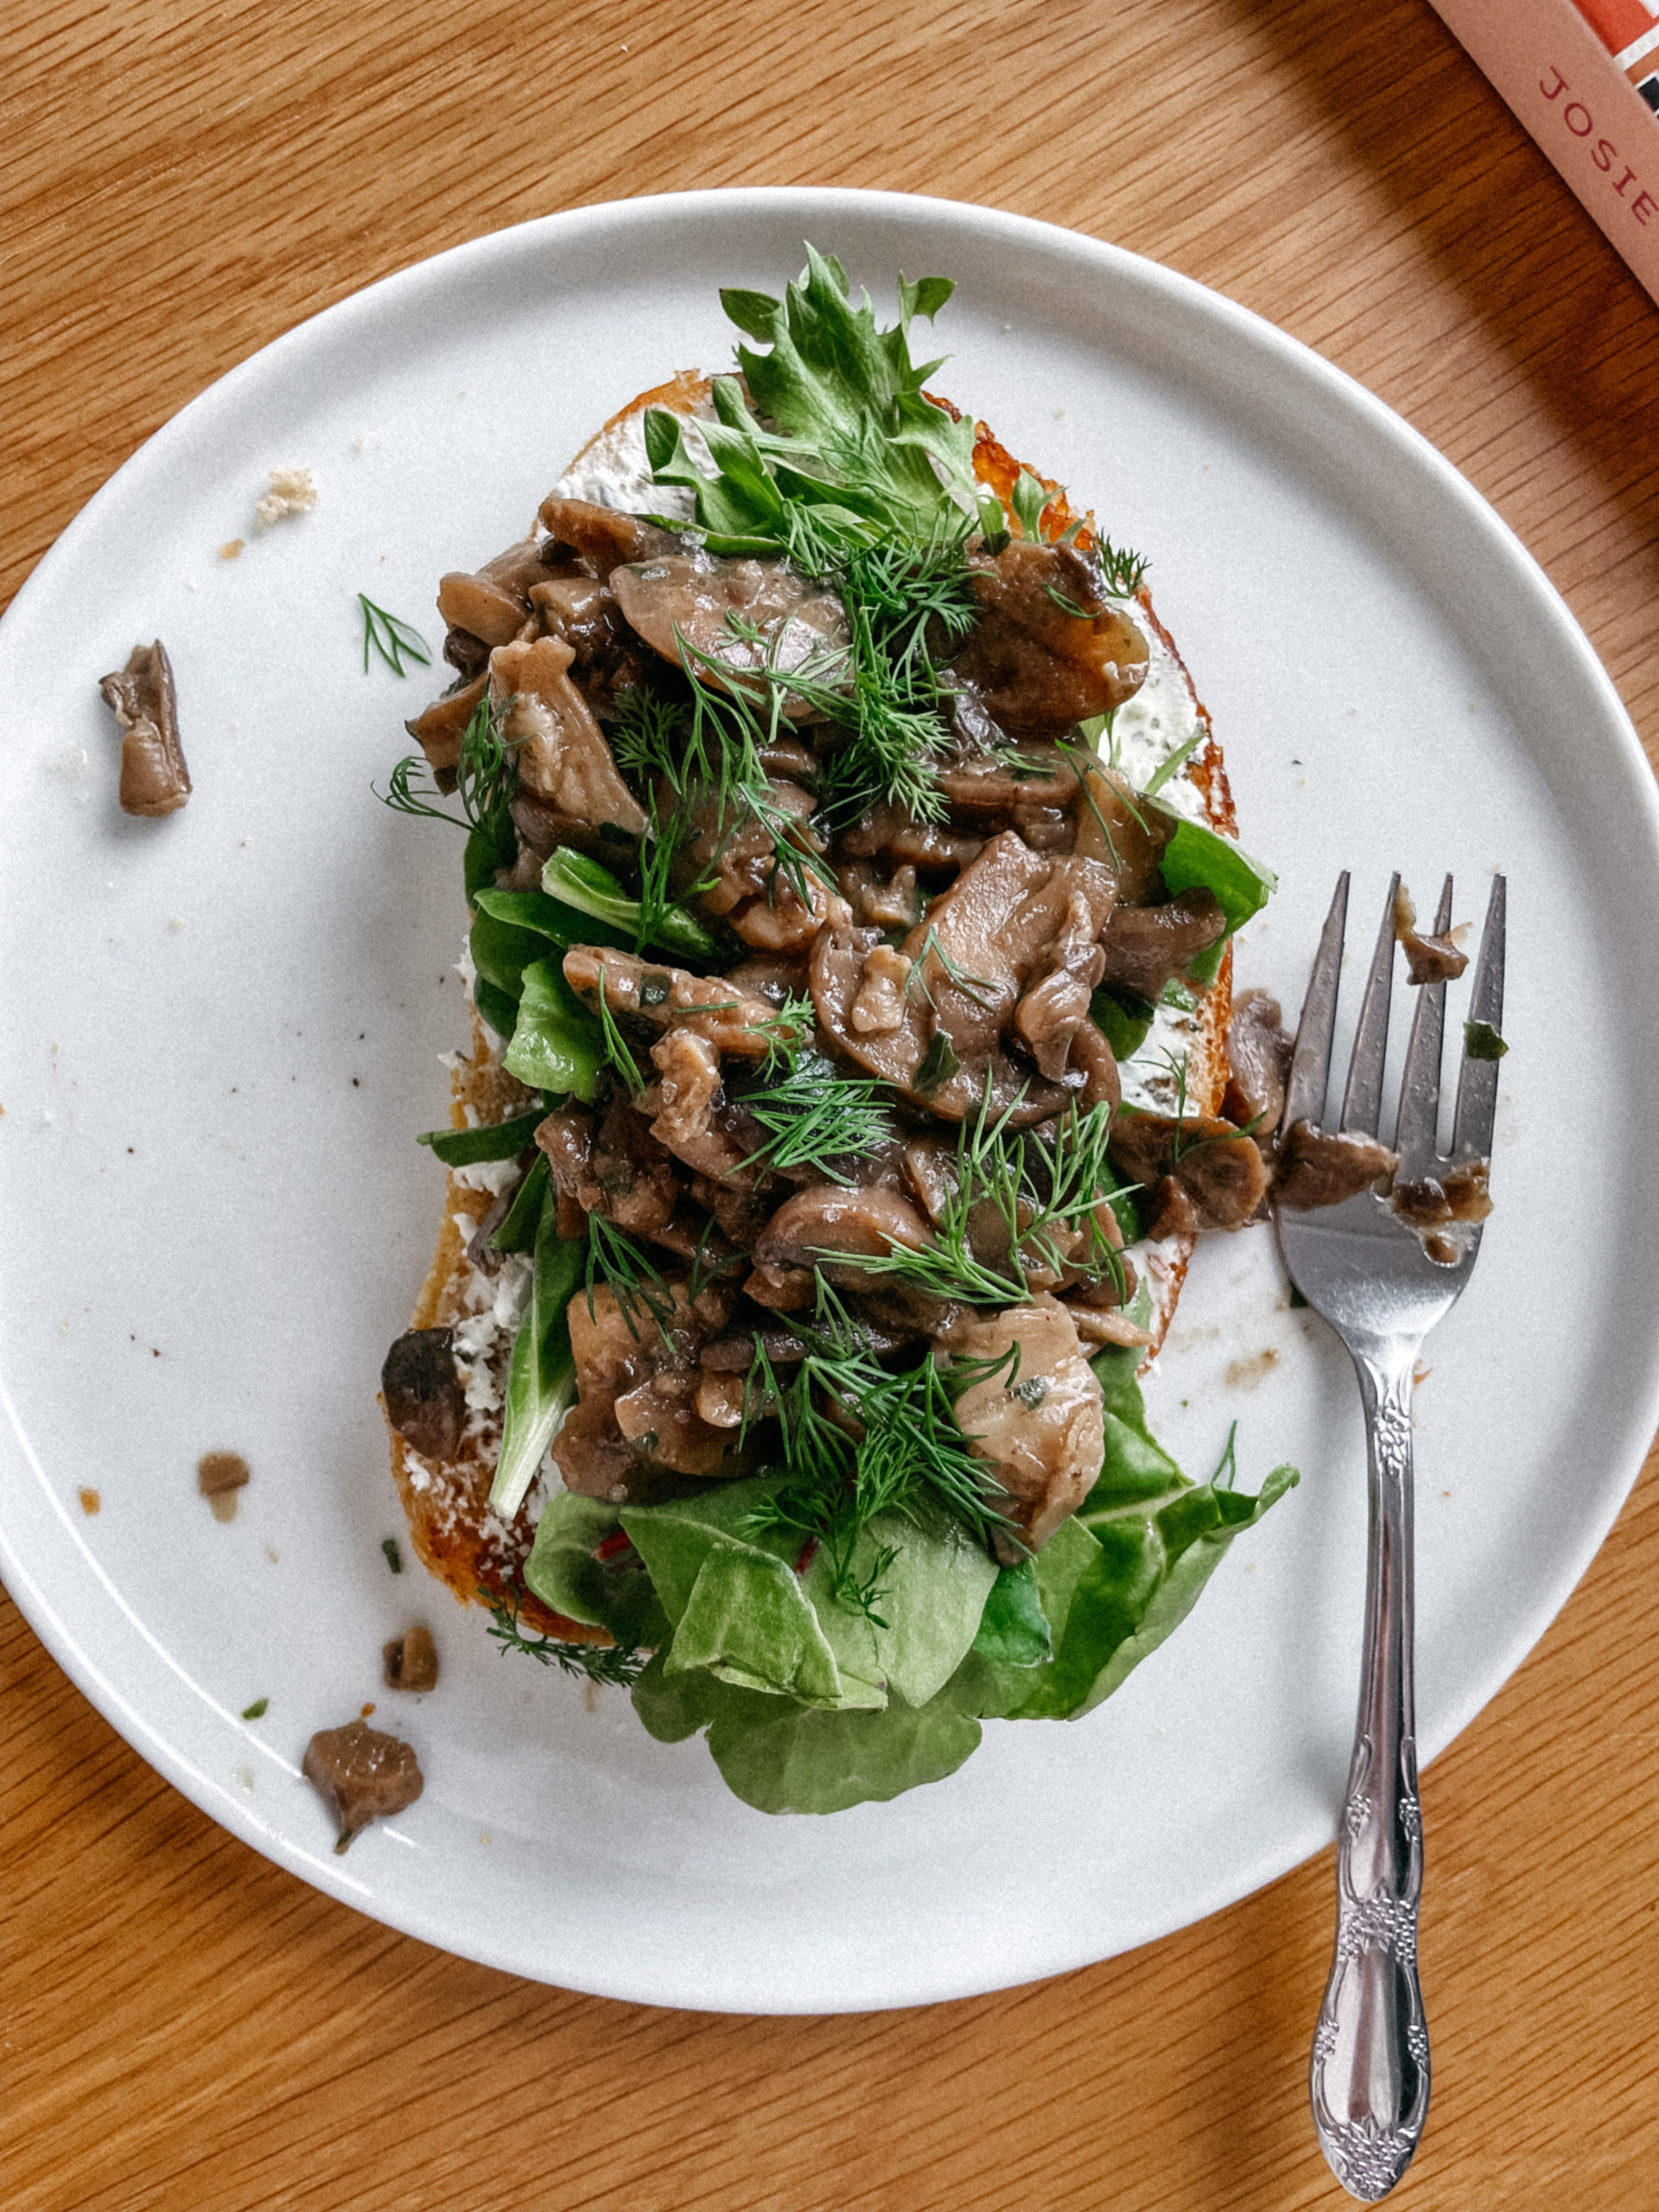 Mushrooms on toast with herb chèvre and greens | 3 easy weekday meals to whip up at home. bygabriella.co